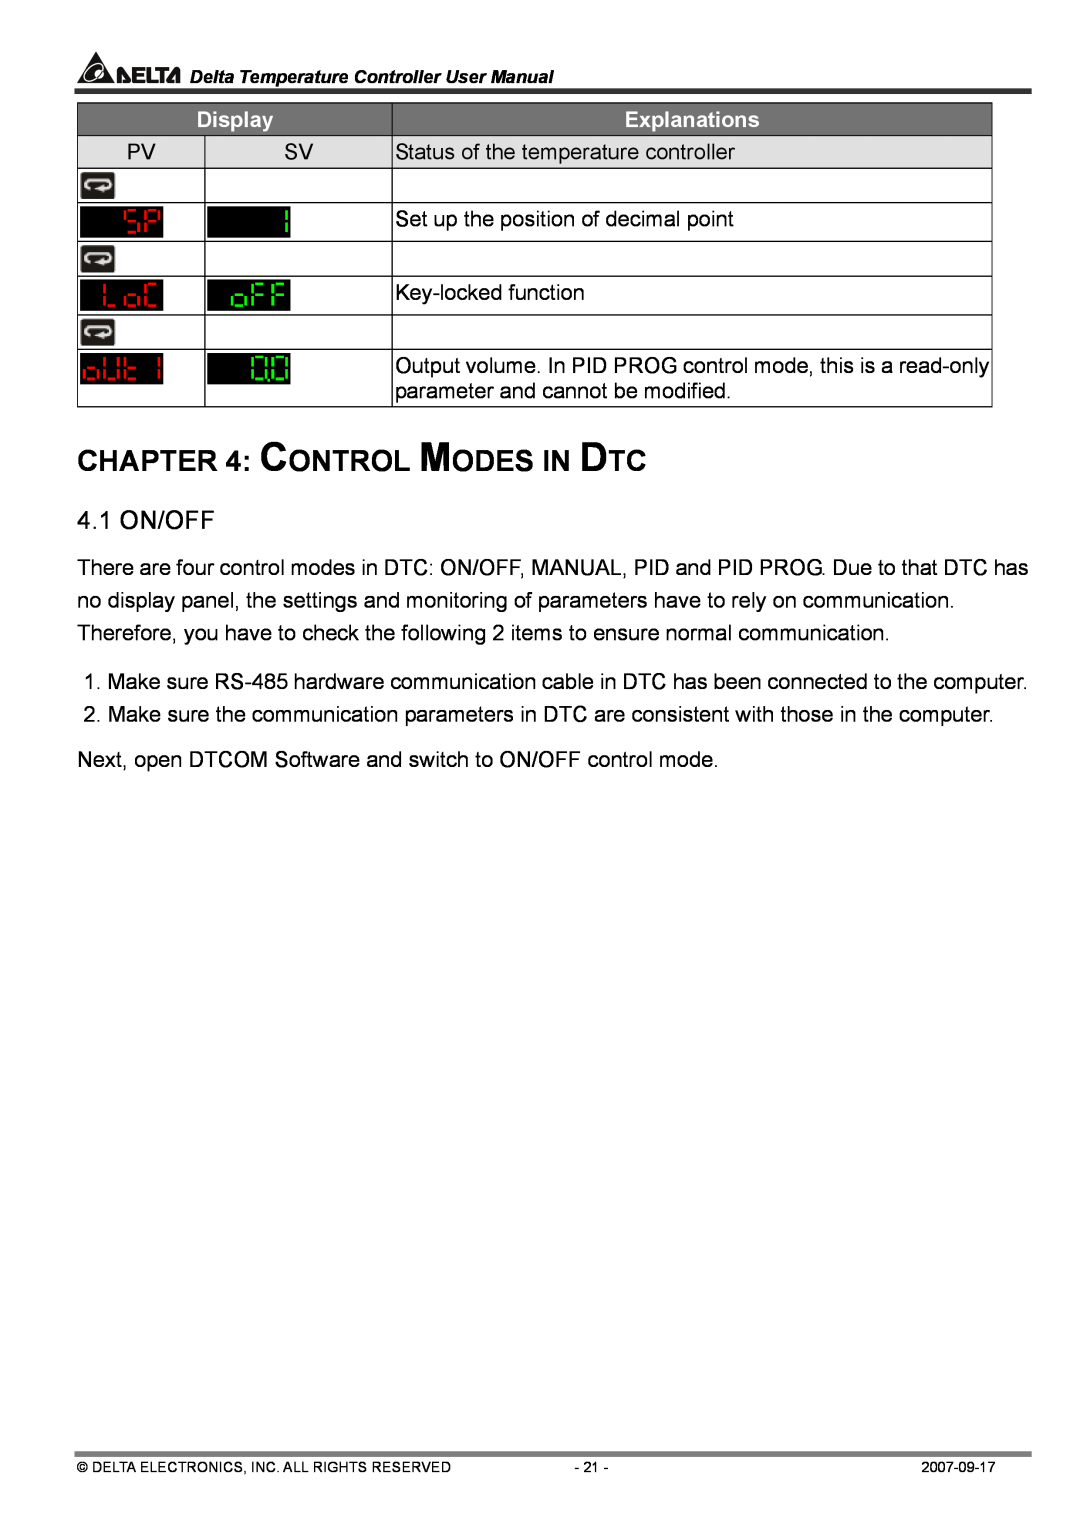 Delta Electronics DTA4896R1, DTC1000R user manual Control Modes In Dtc, 4.1 ON/OFF, Display, Explanations 